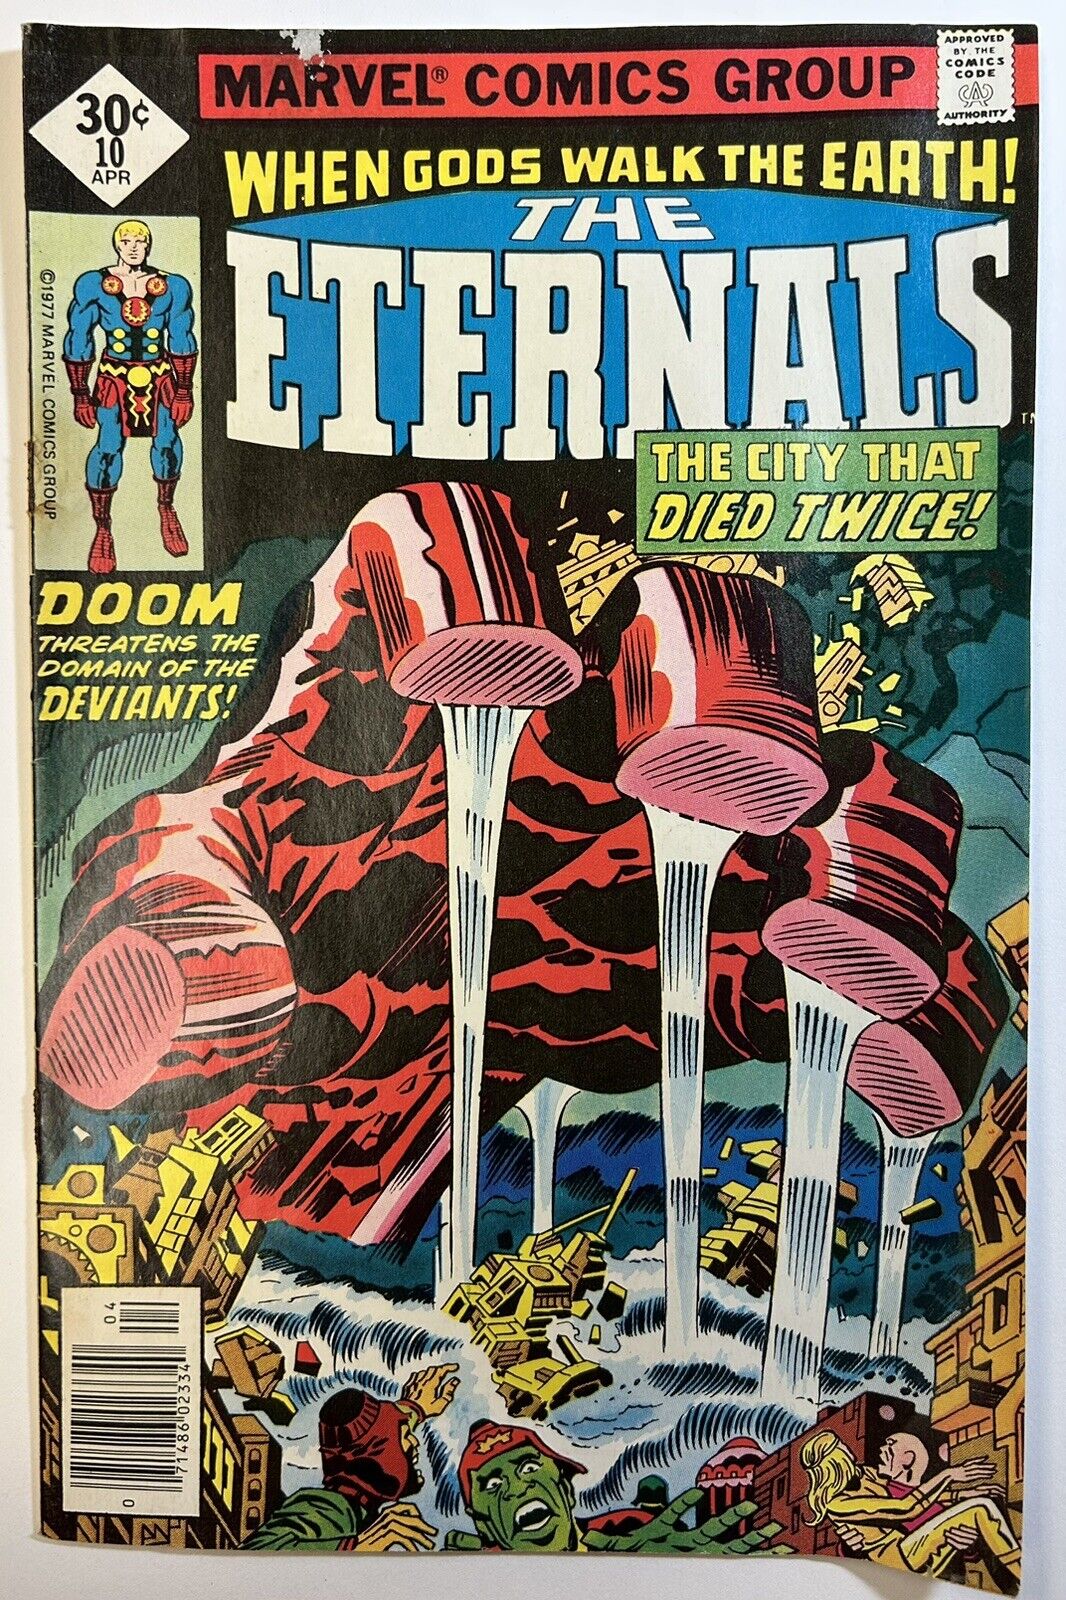 The Eternals #10 April 1977 Marvel Comic Book, The City That Died Twice